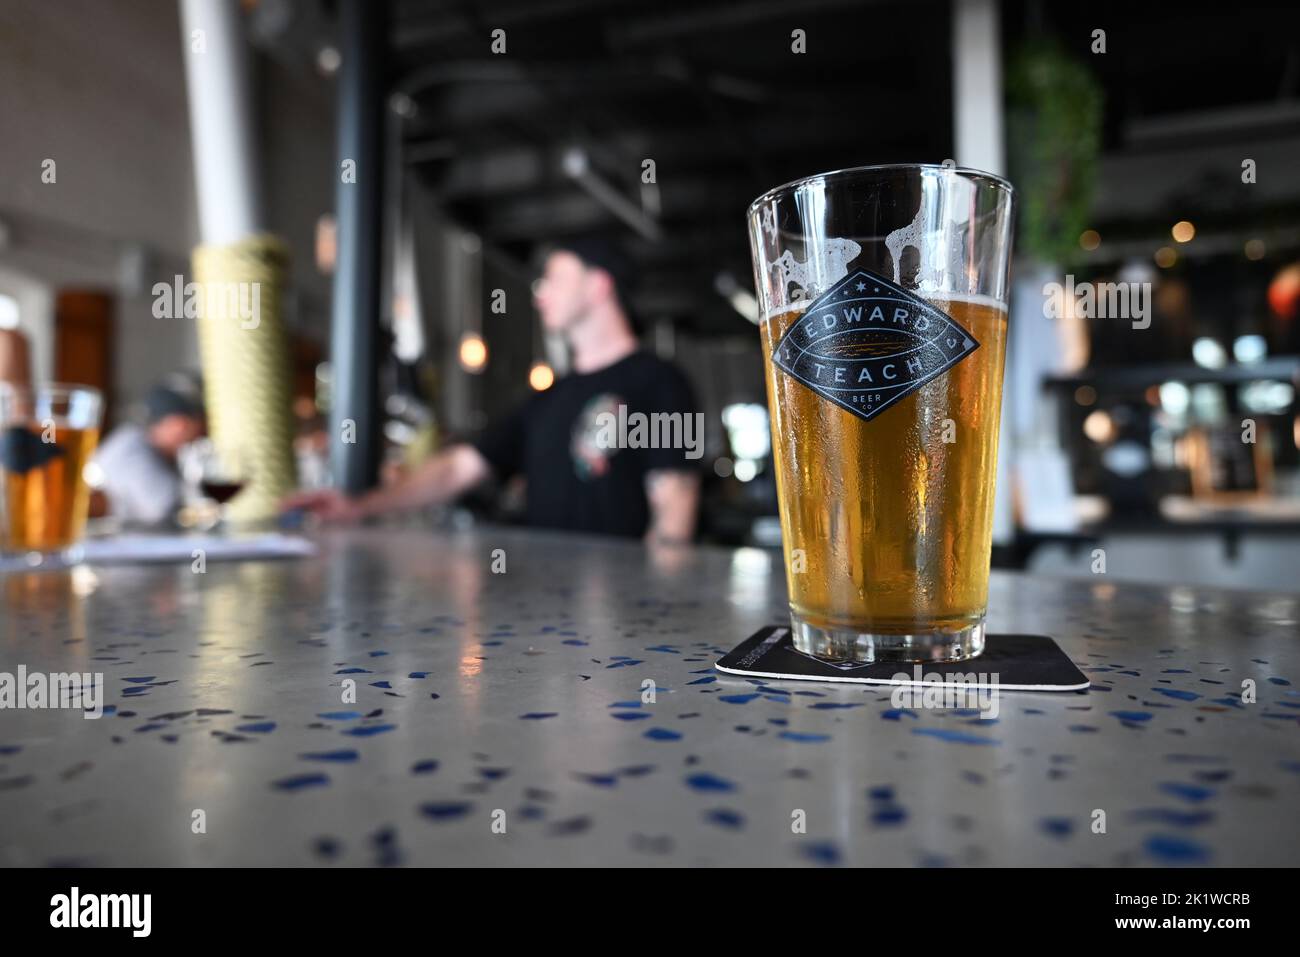 Wilmington, NC, August 6, 2022 - Close up of pint glass with beer on the main bar of Edward Teach Brewery. Stock Photo